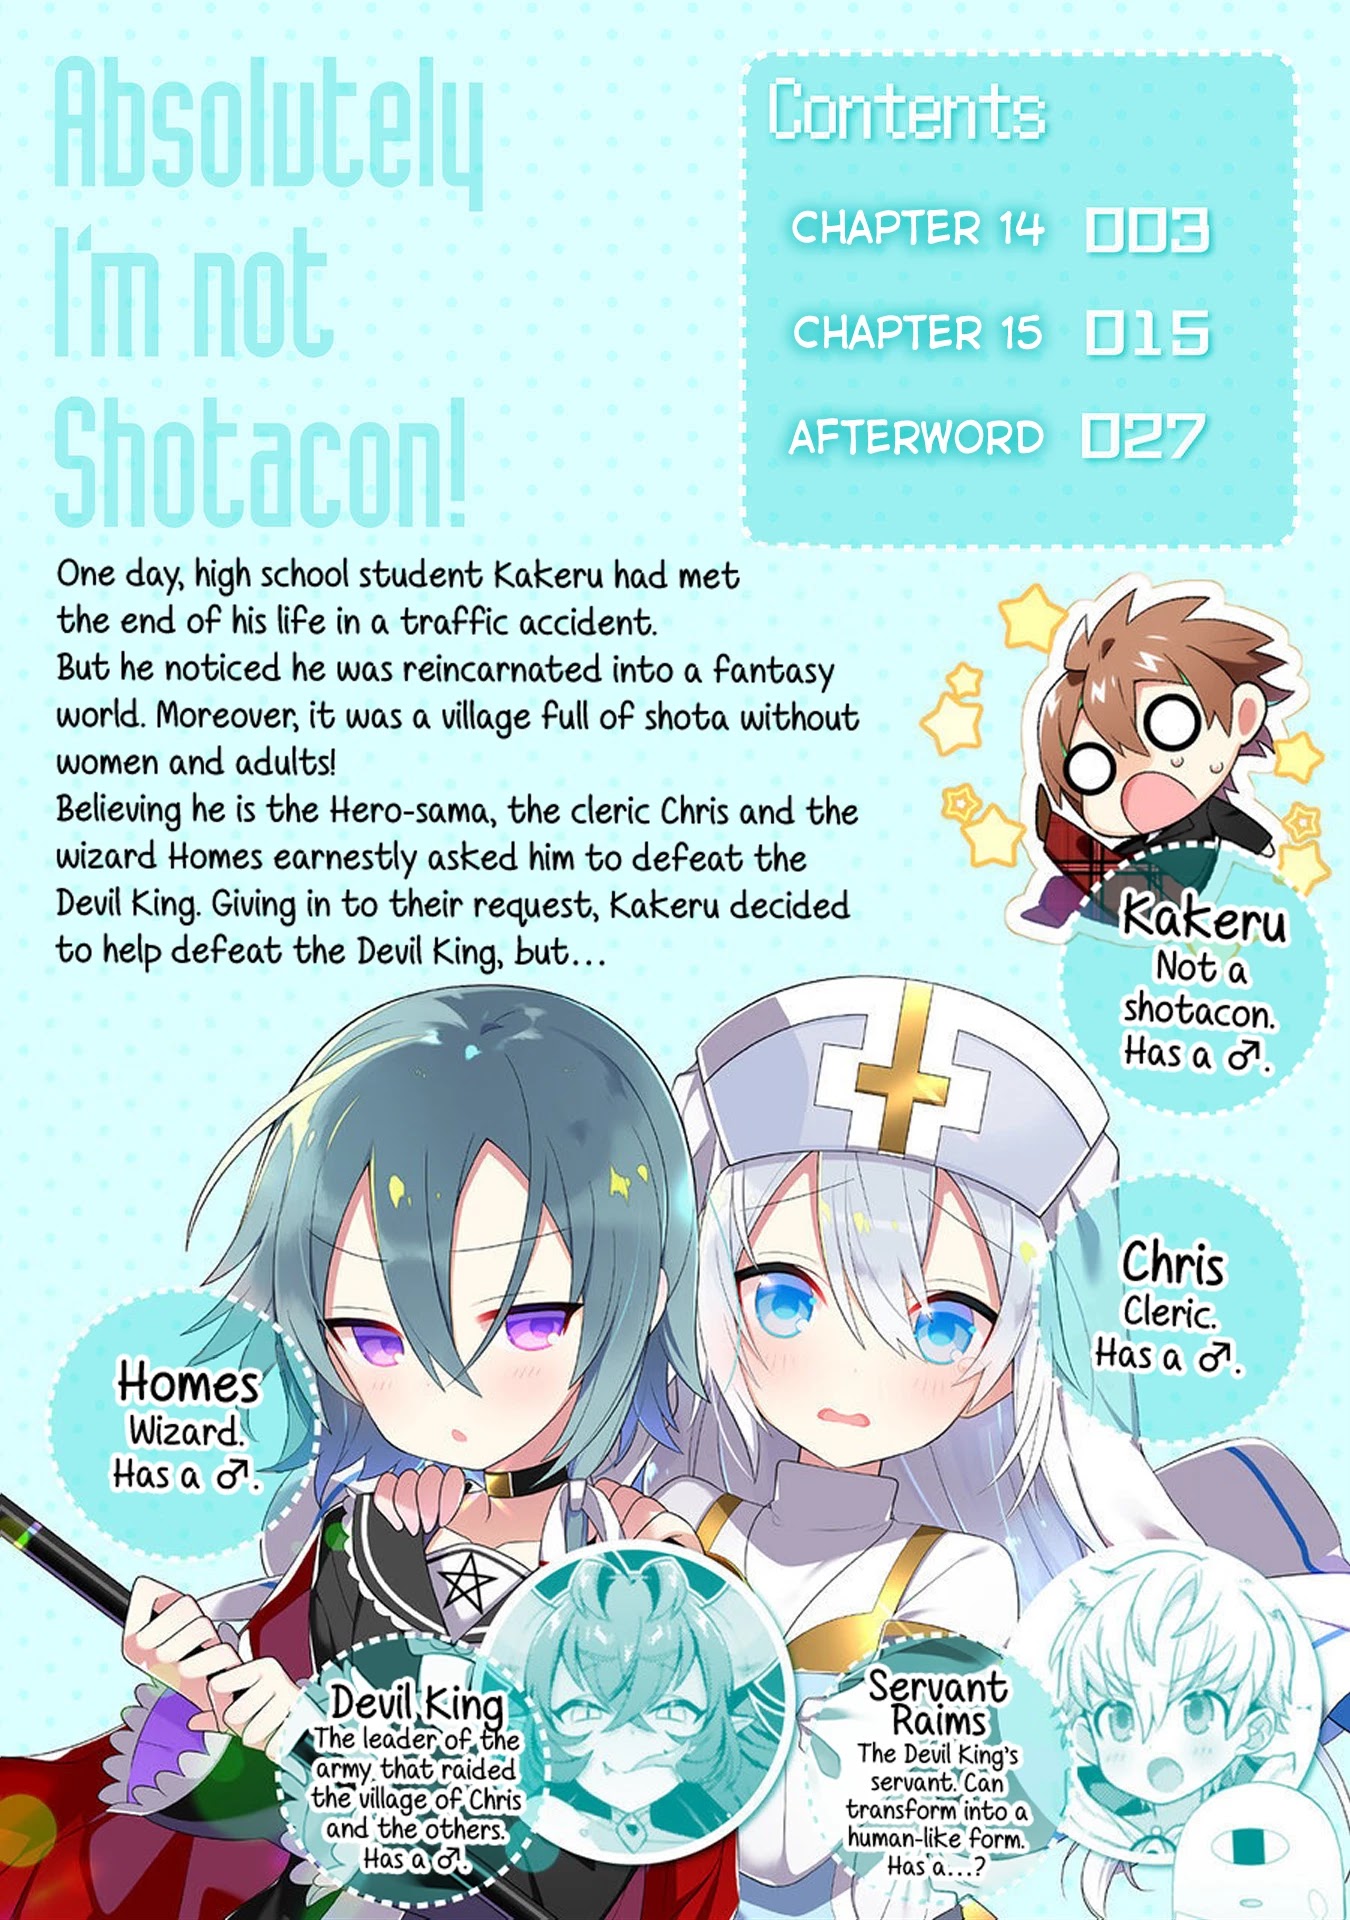 After Reincarnation, My Party Was Full Of Traps, But I'm Not A Shotacon! - 14 page 1